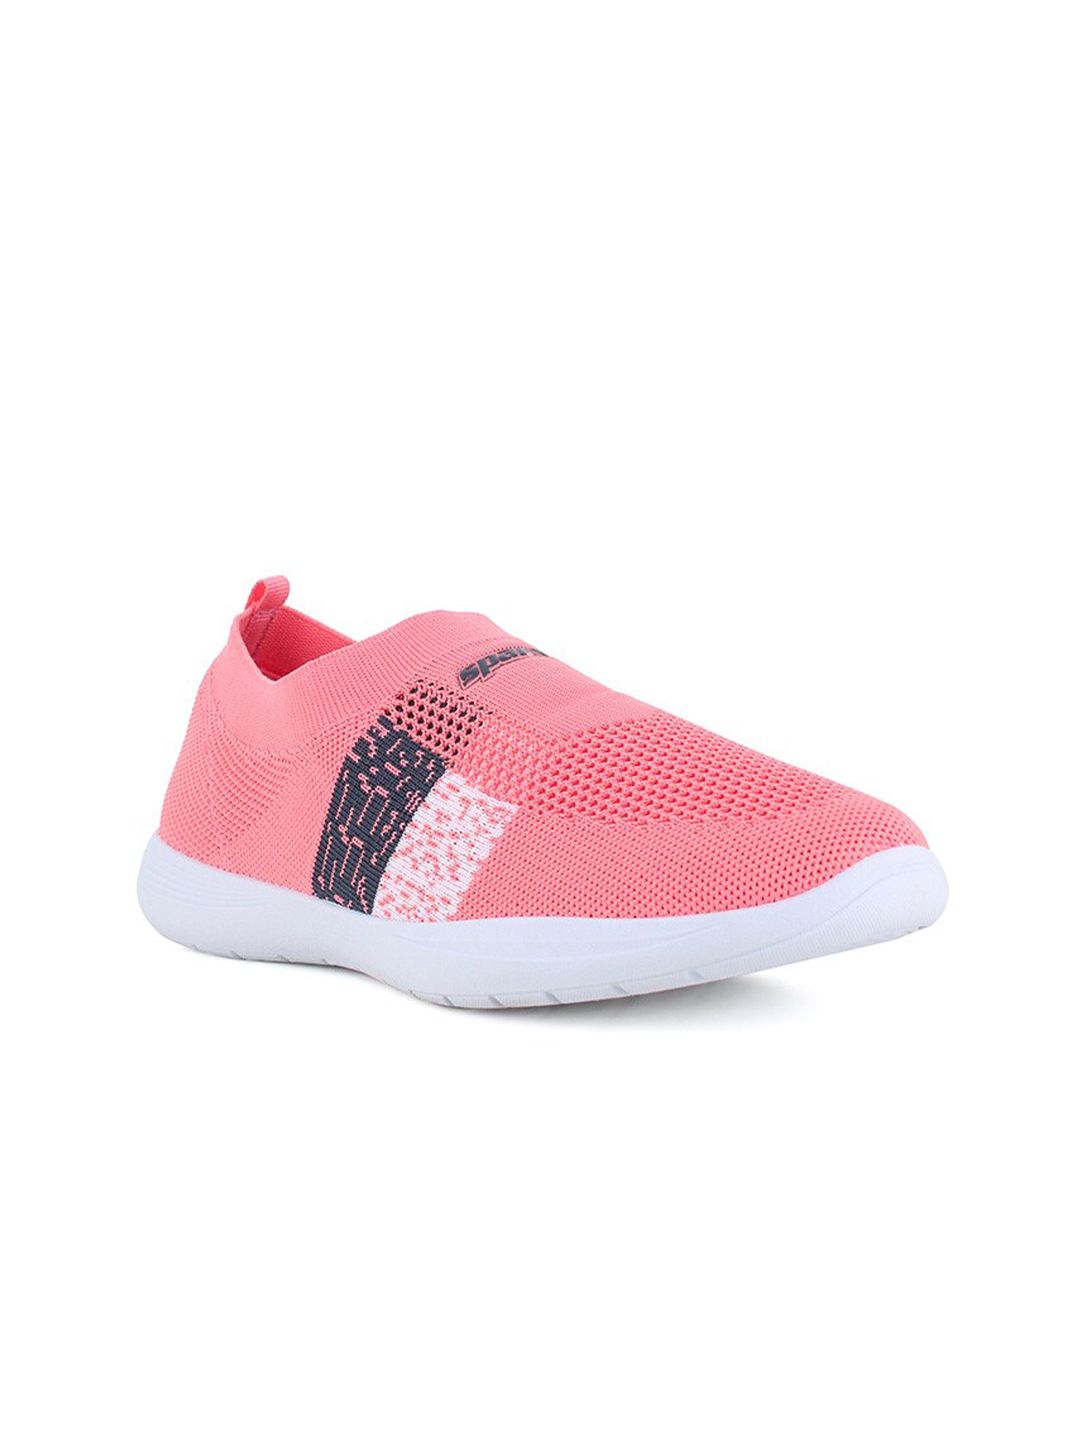 Sparx Women Peach-Coloured Textile Running Non-Marking Shoes Price in India